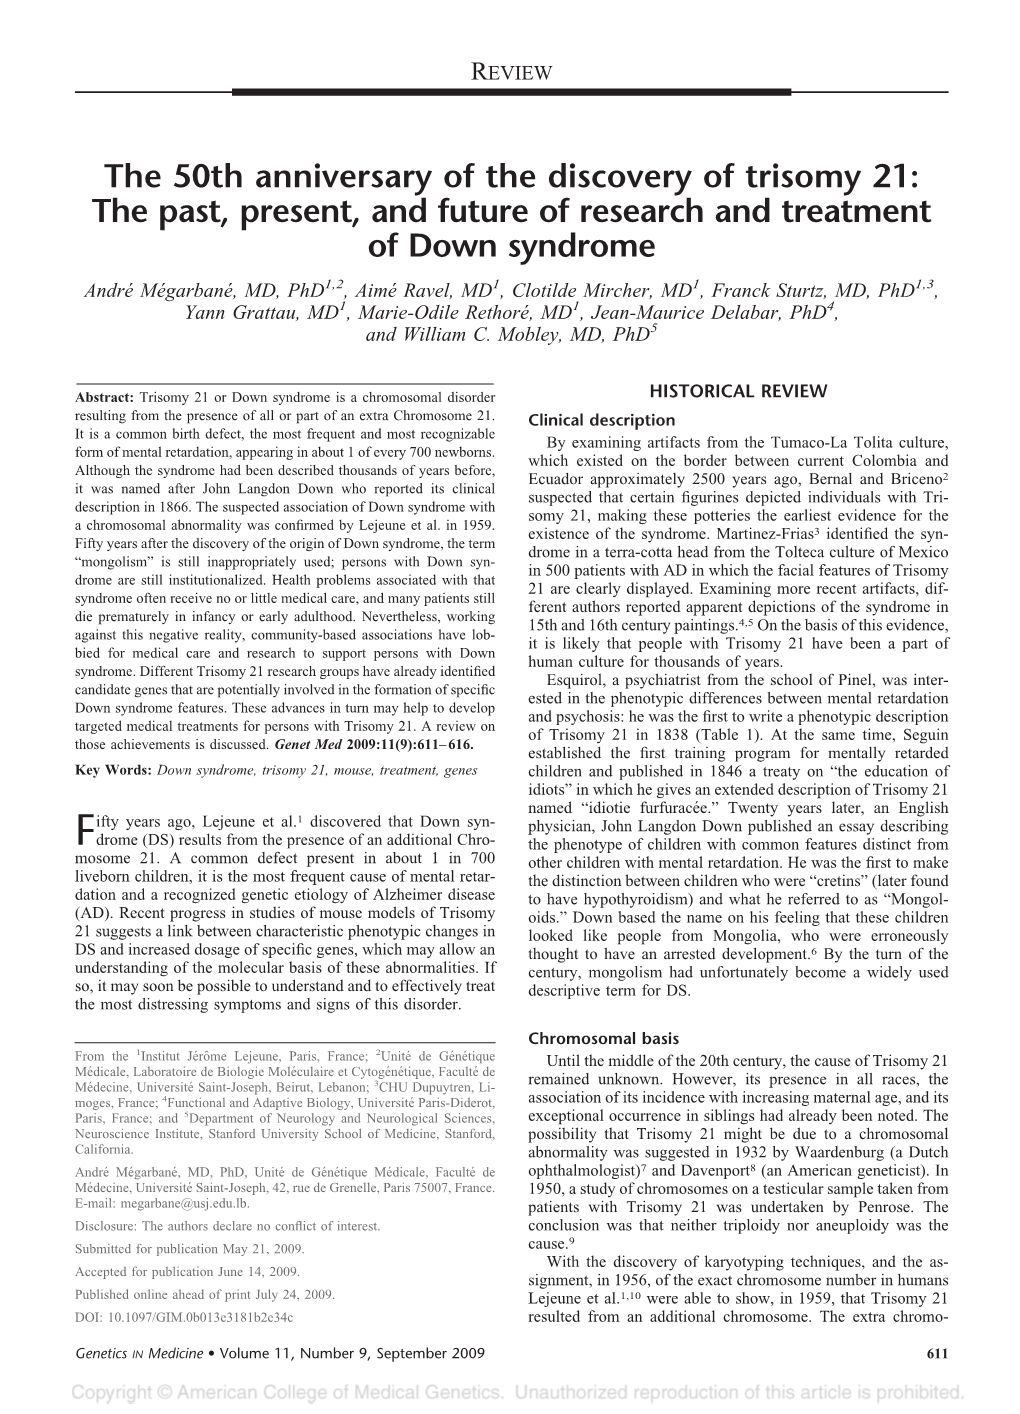 The 50Th Anniversary of the Discovery of Trisomy 21: the Past, Present, and Future of Research and Treatment of Down Syndrome